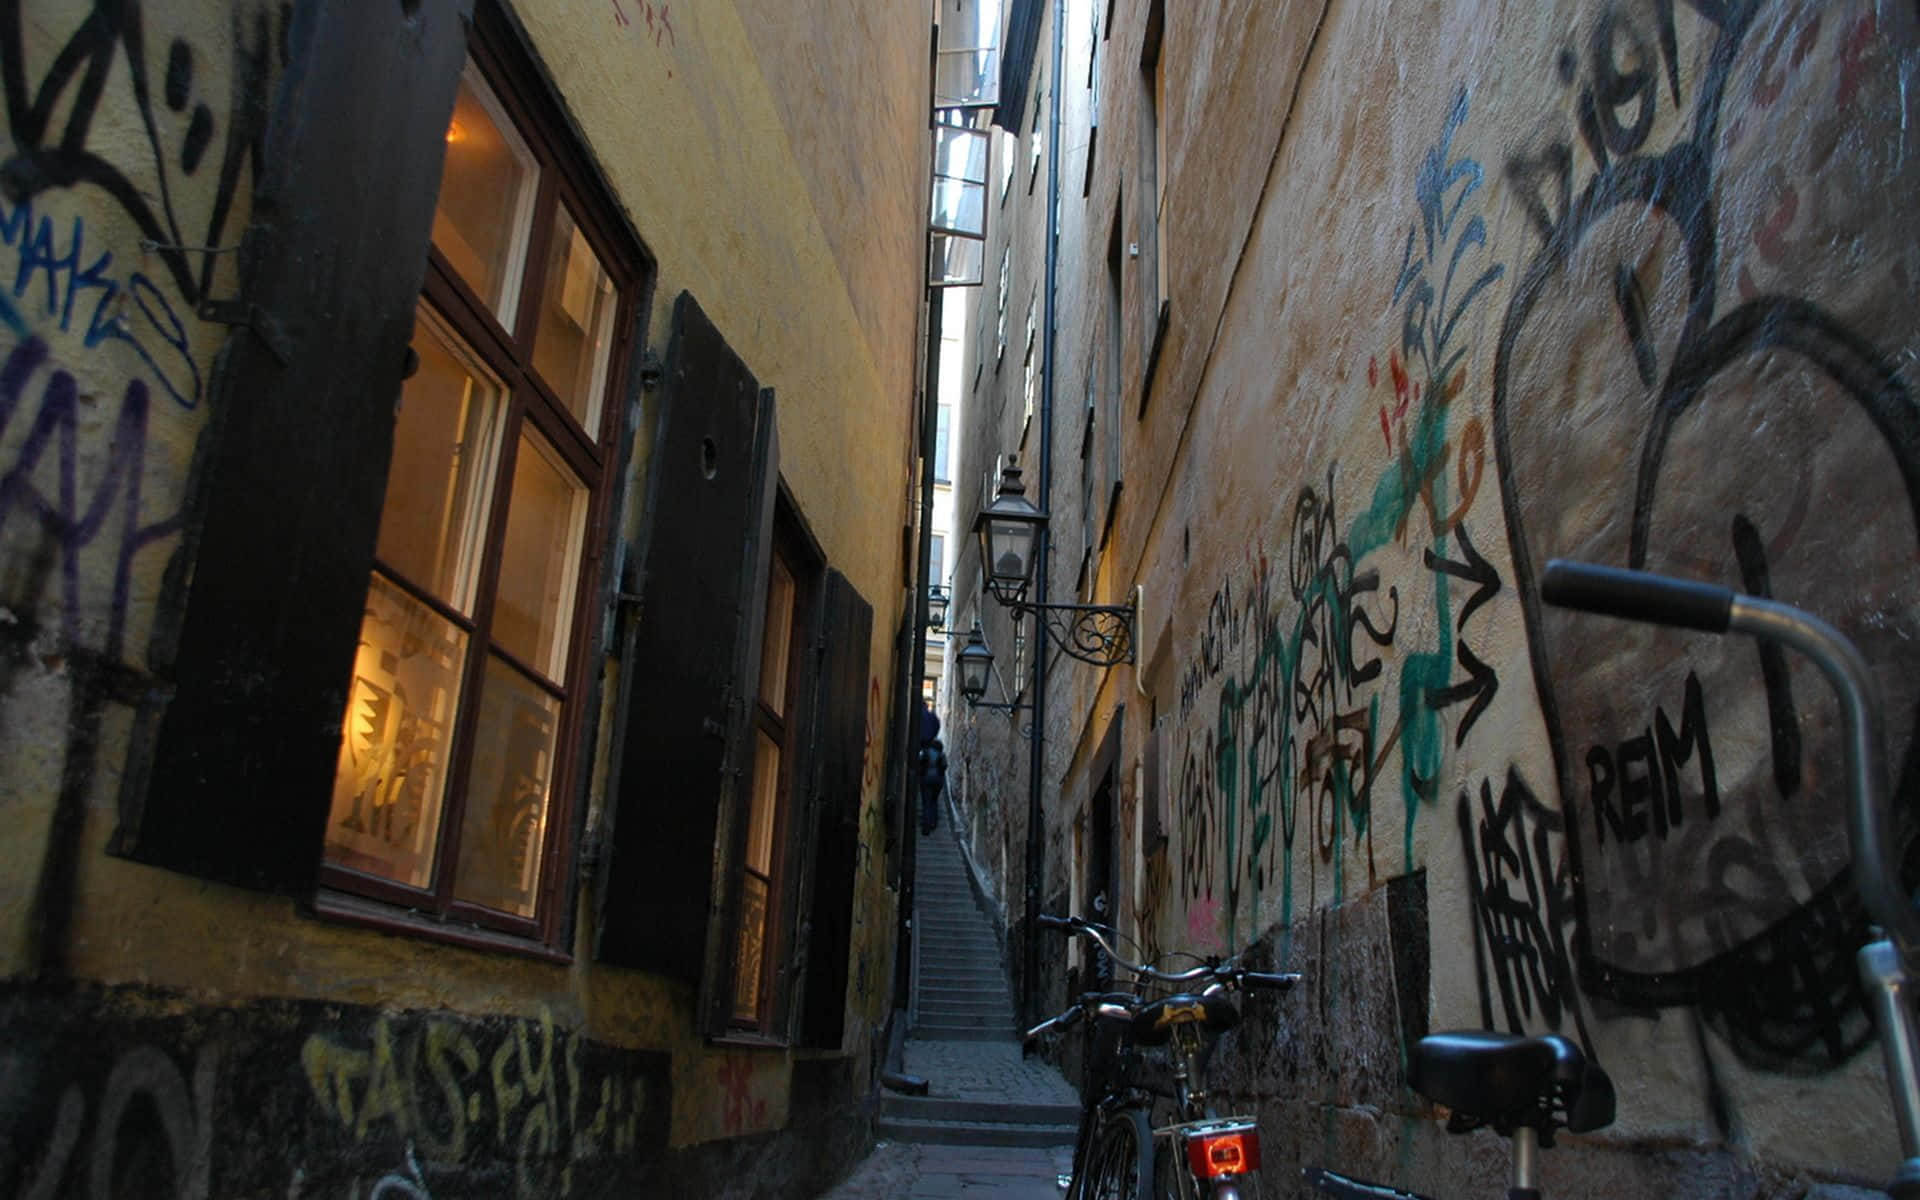 A Bike Parked In A Narrow Alley